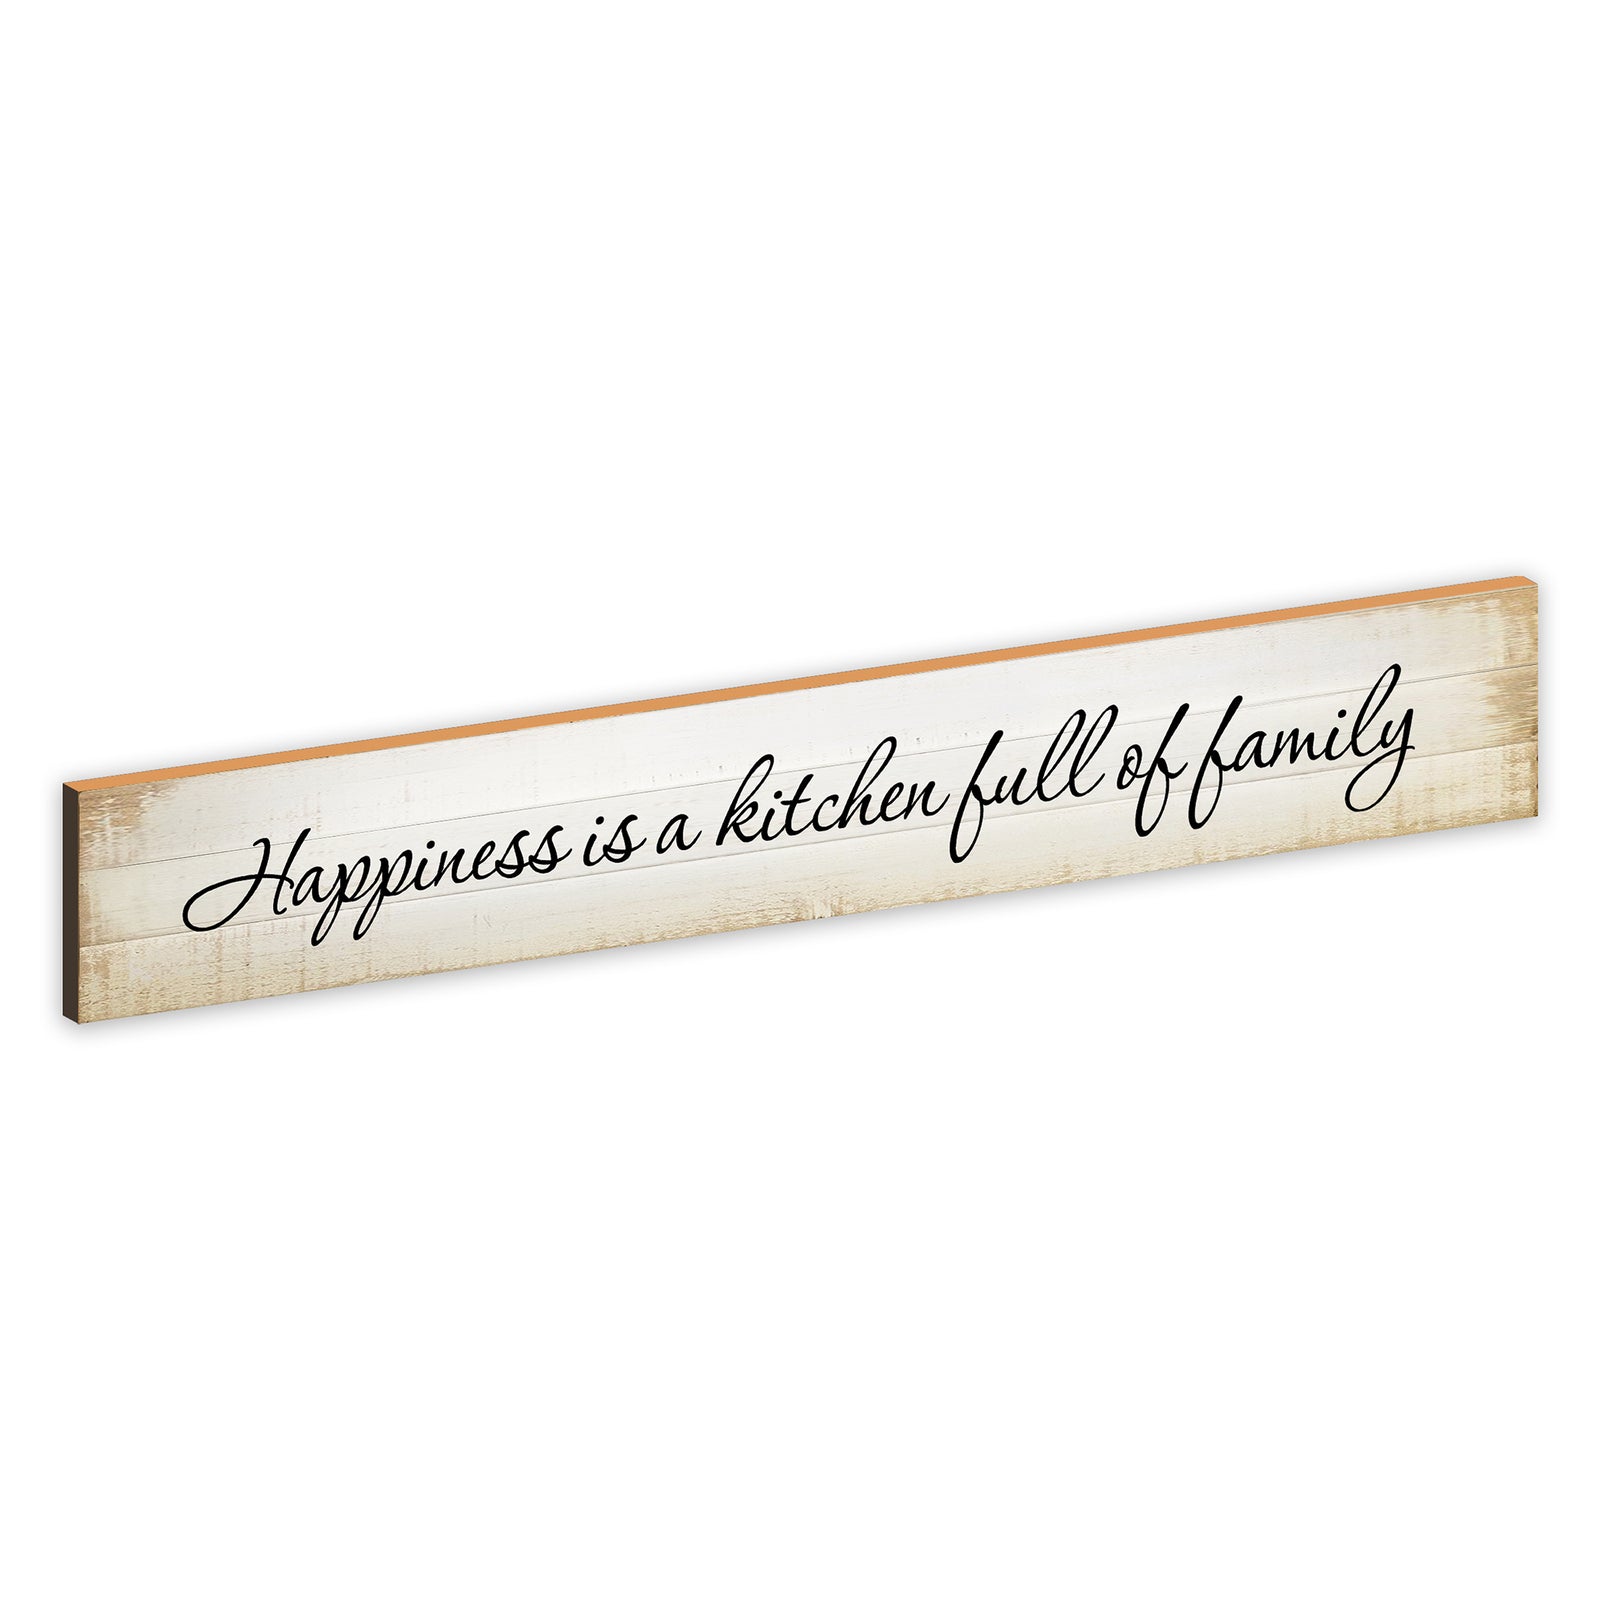 Vintage Wooden Kitchen Wall Plaque For Home Décor And Gift Ideas - Happiness Is A Kitchen Full Of Family